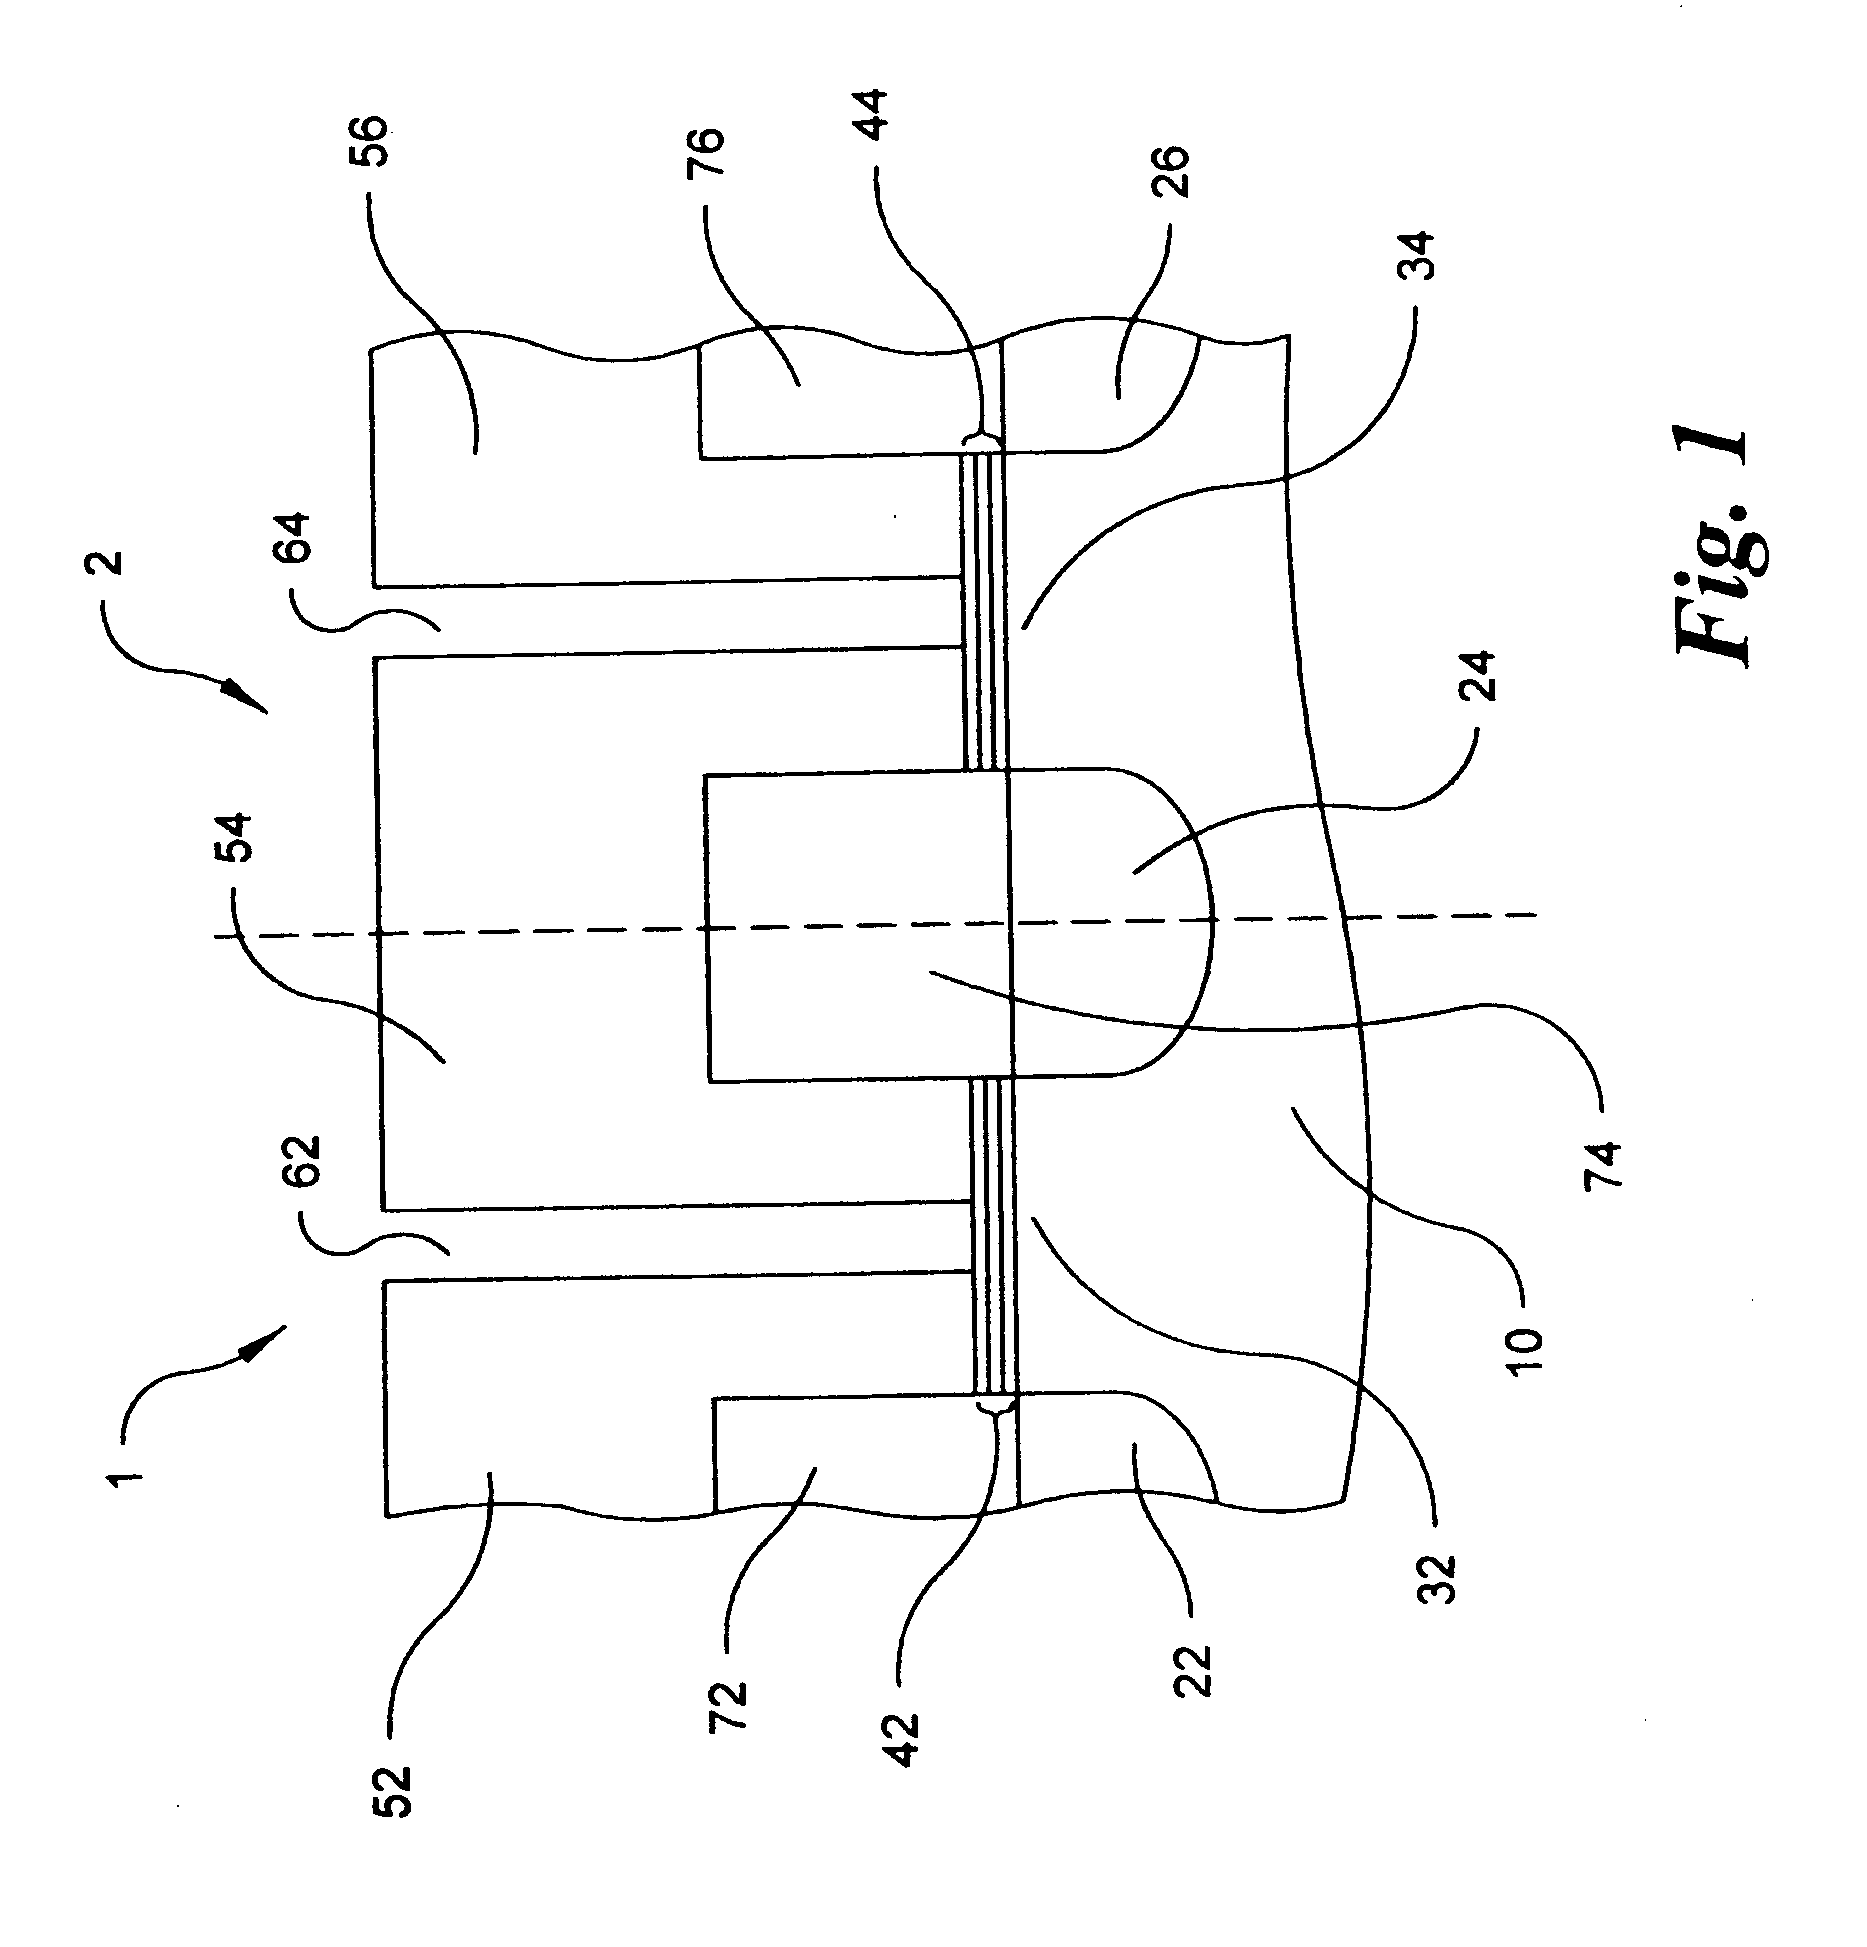 Dual-gate, non-volatile memory cells, arrays thereof, methods of manufacturing the same and methods of operating the same